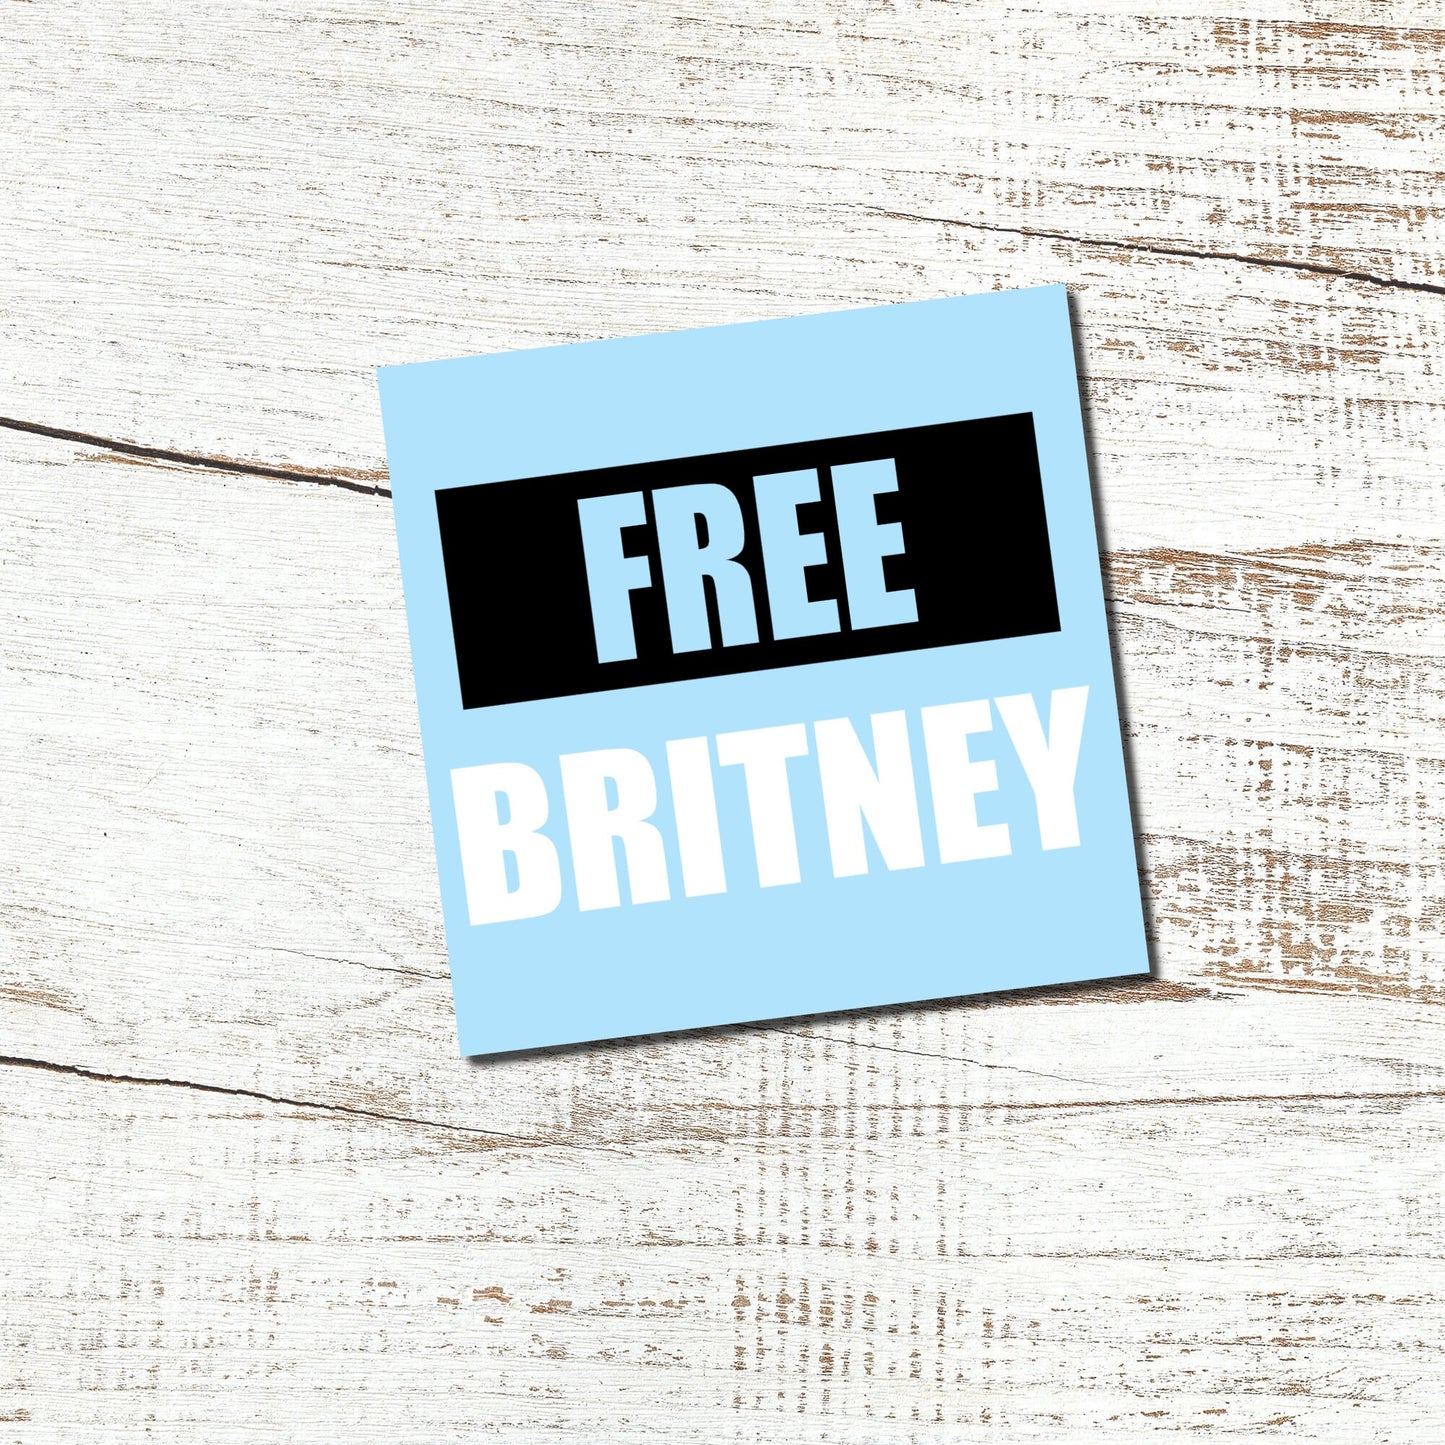 Free Britney Vinyl Decal - Car Decal, Wall Decal, Laptop Decal, Cricut/Silhouette Decal, Cup Decal, Tumbler Decal, Wine Glass Decal